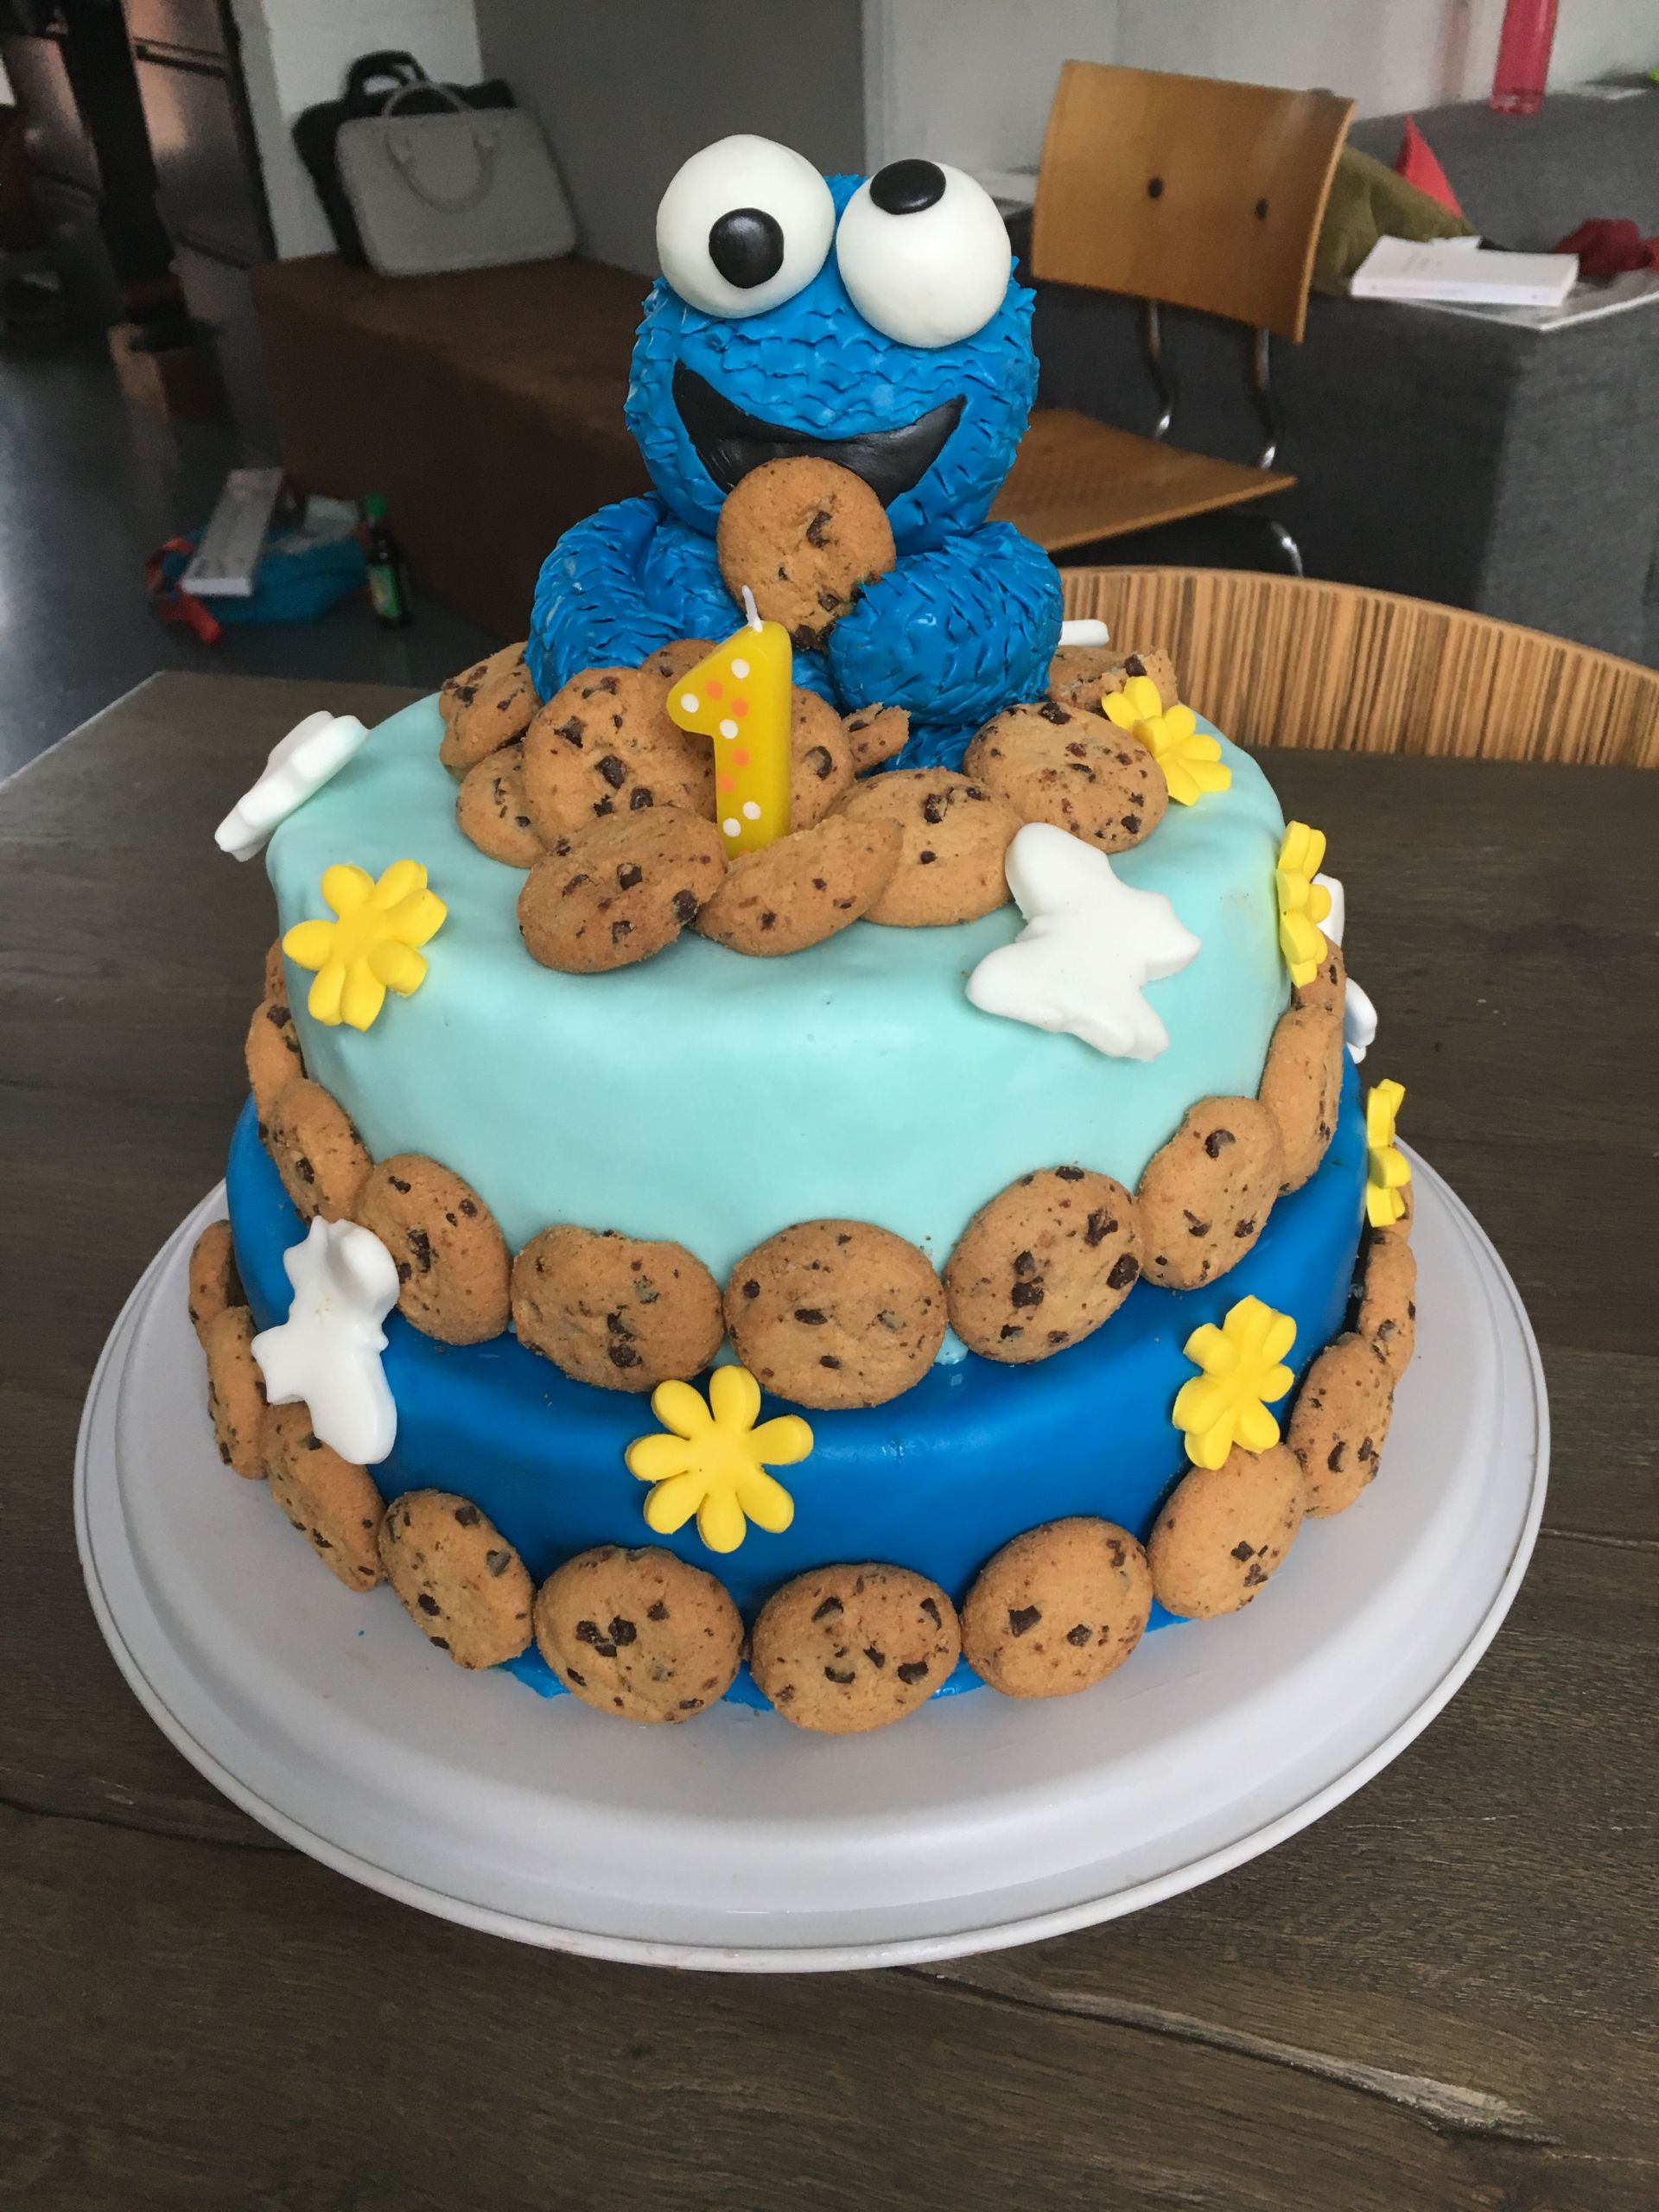 Birthday Cake For 1 Year Old
 Cookie Monster birthday cake for my 1 year old baby boy